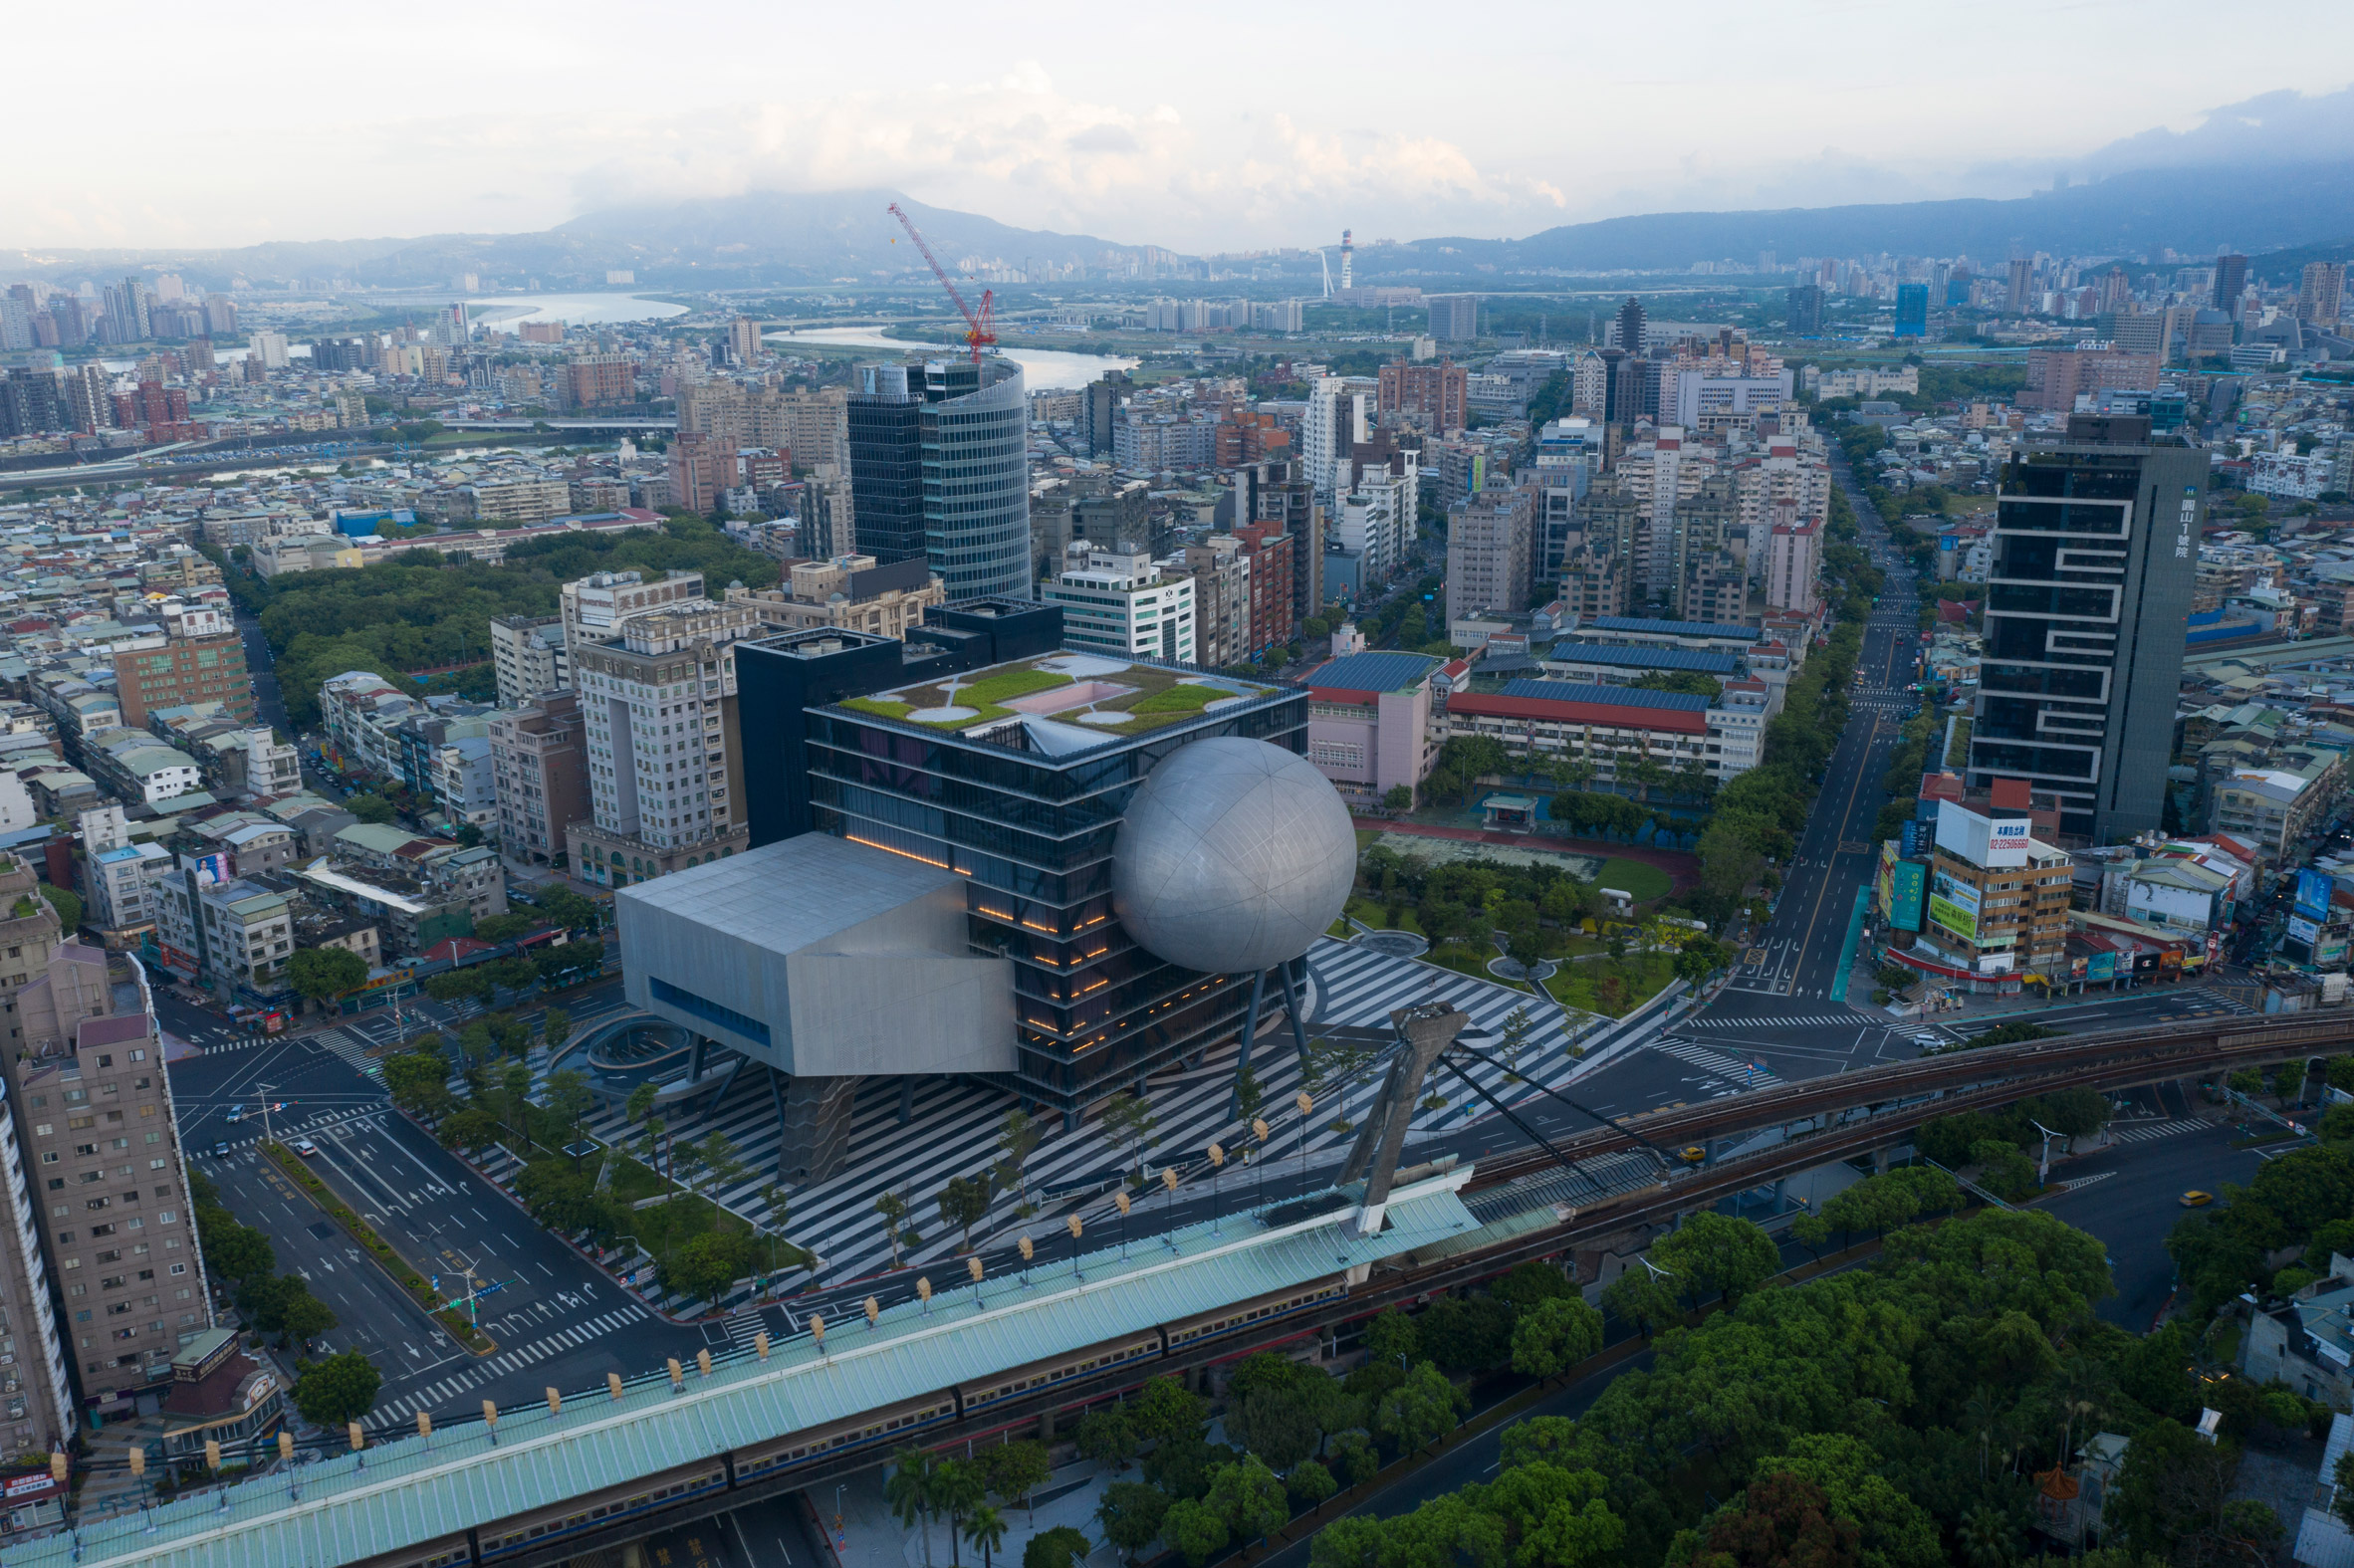 Exterior of the Taipei Performing Arts Center by OMA in Taiwan